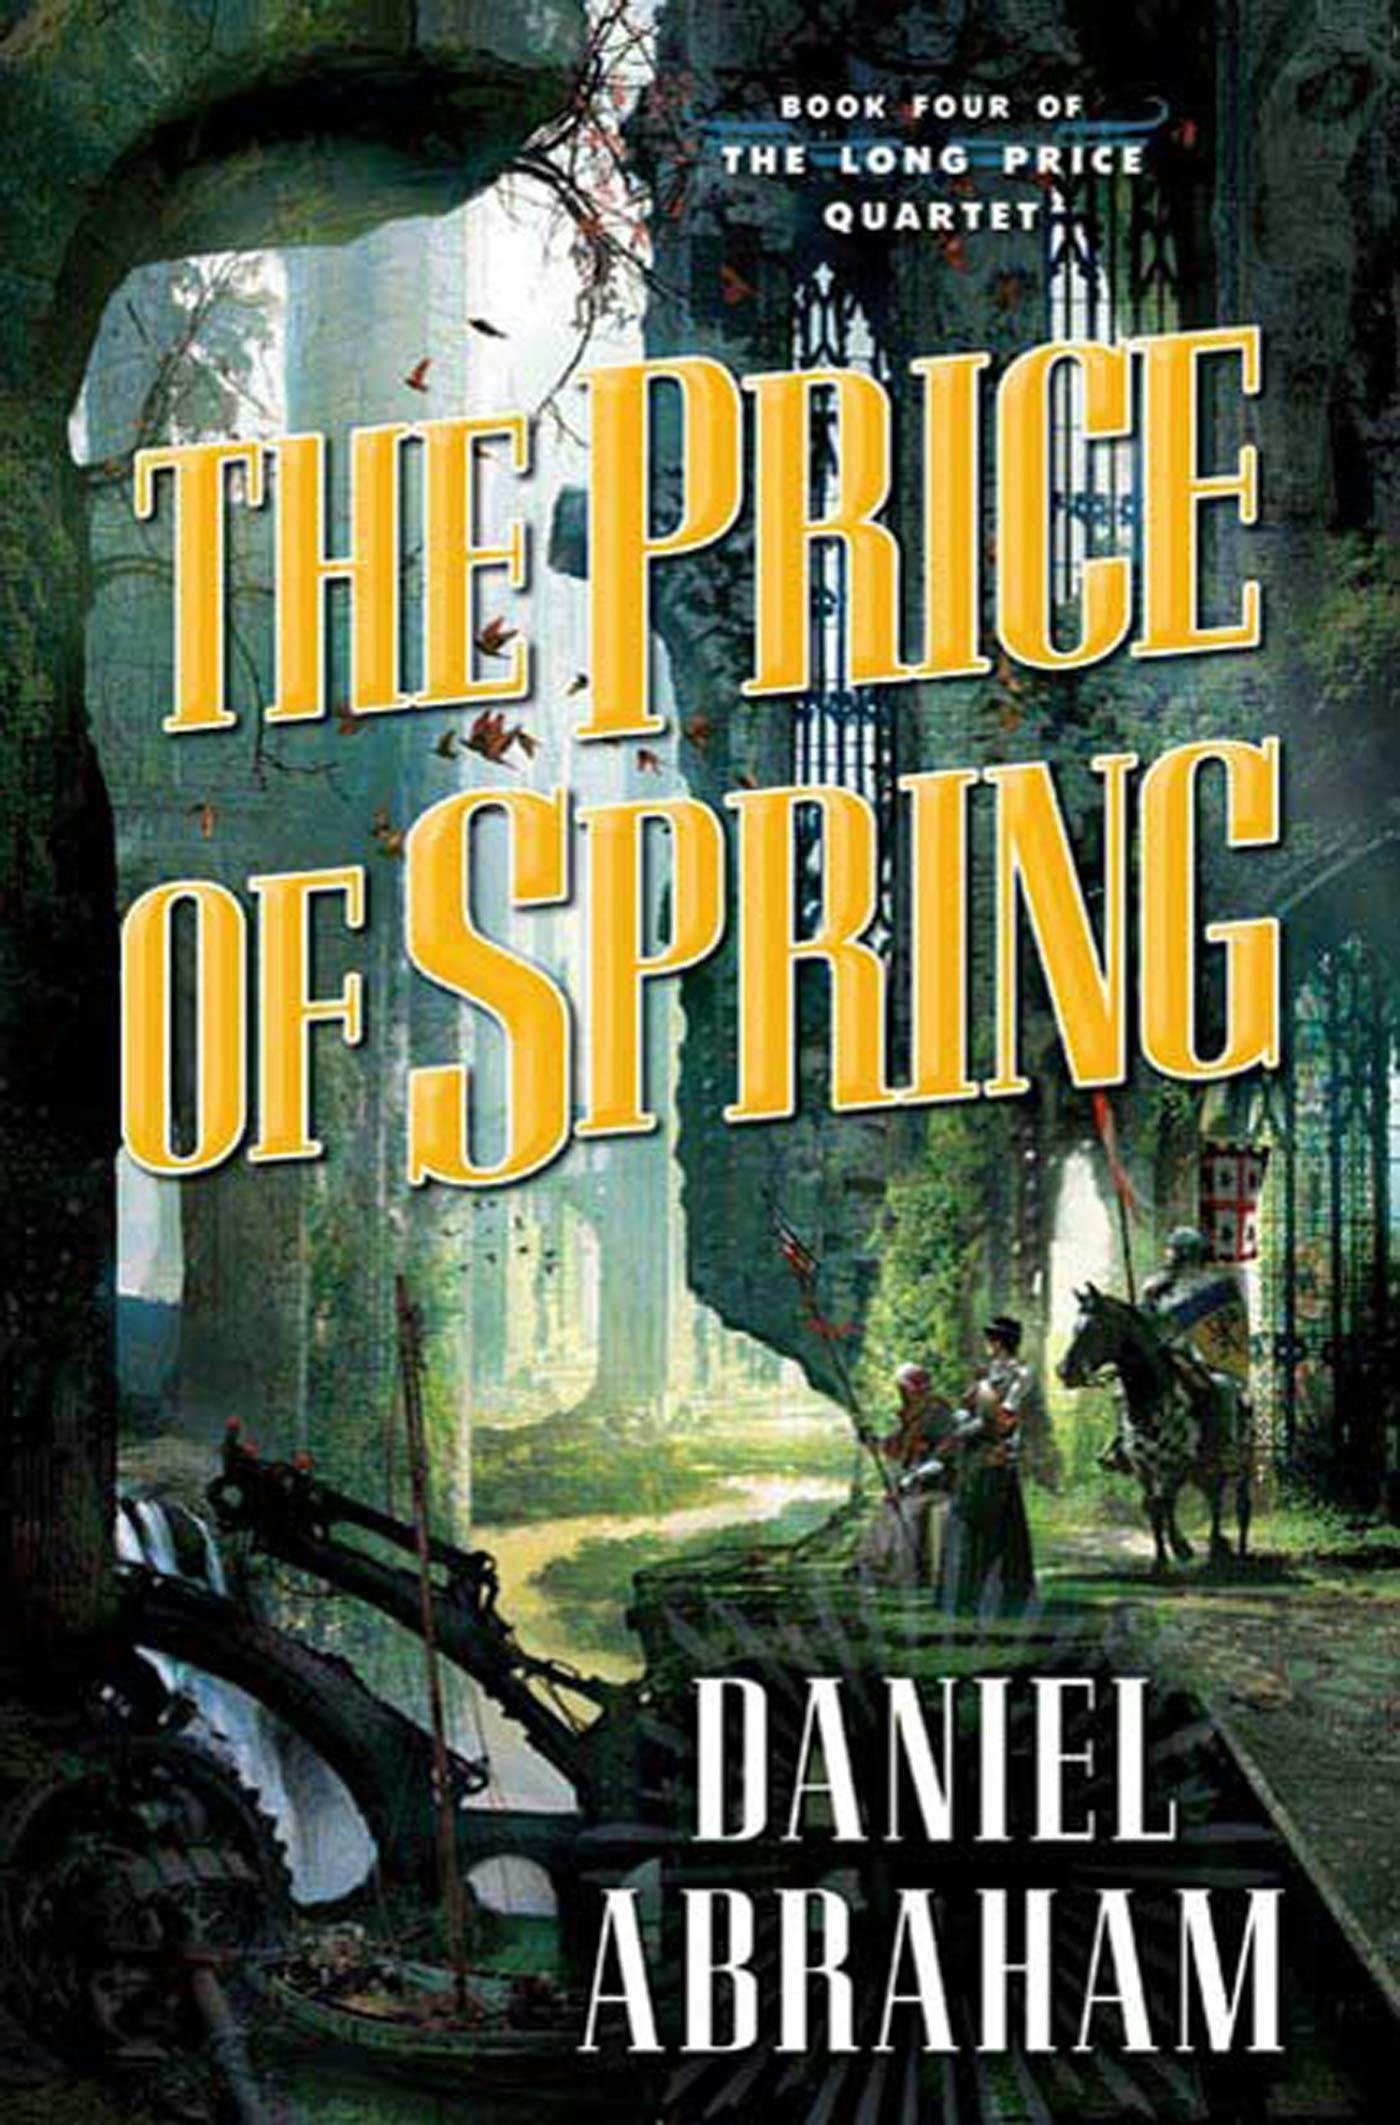 Cover for the book titled as: The Price of Spring